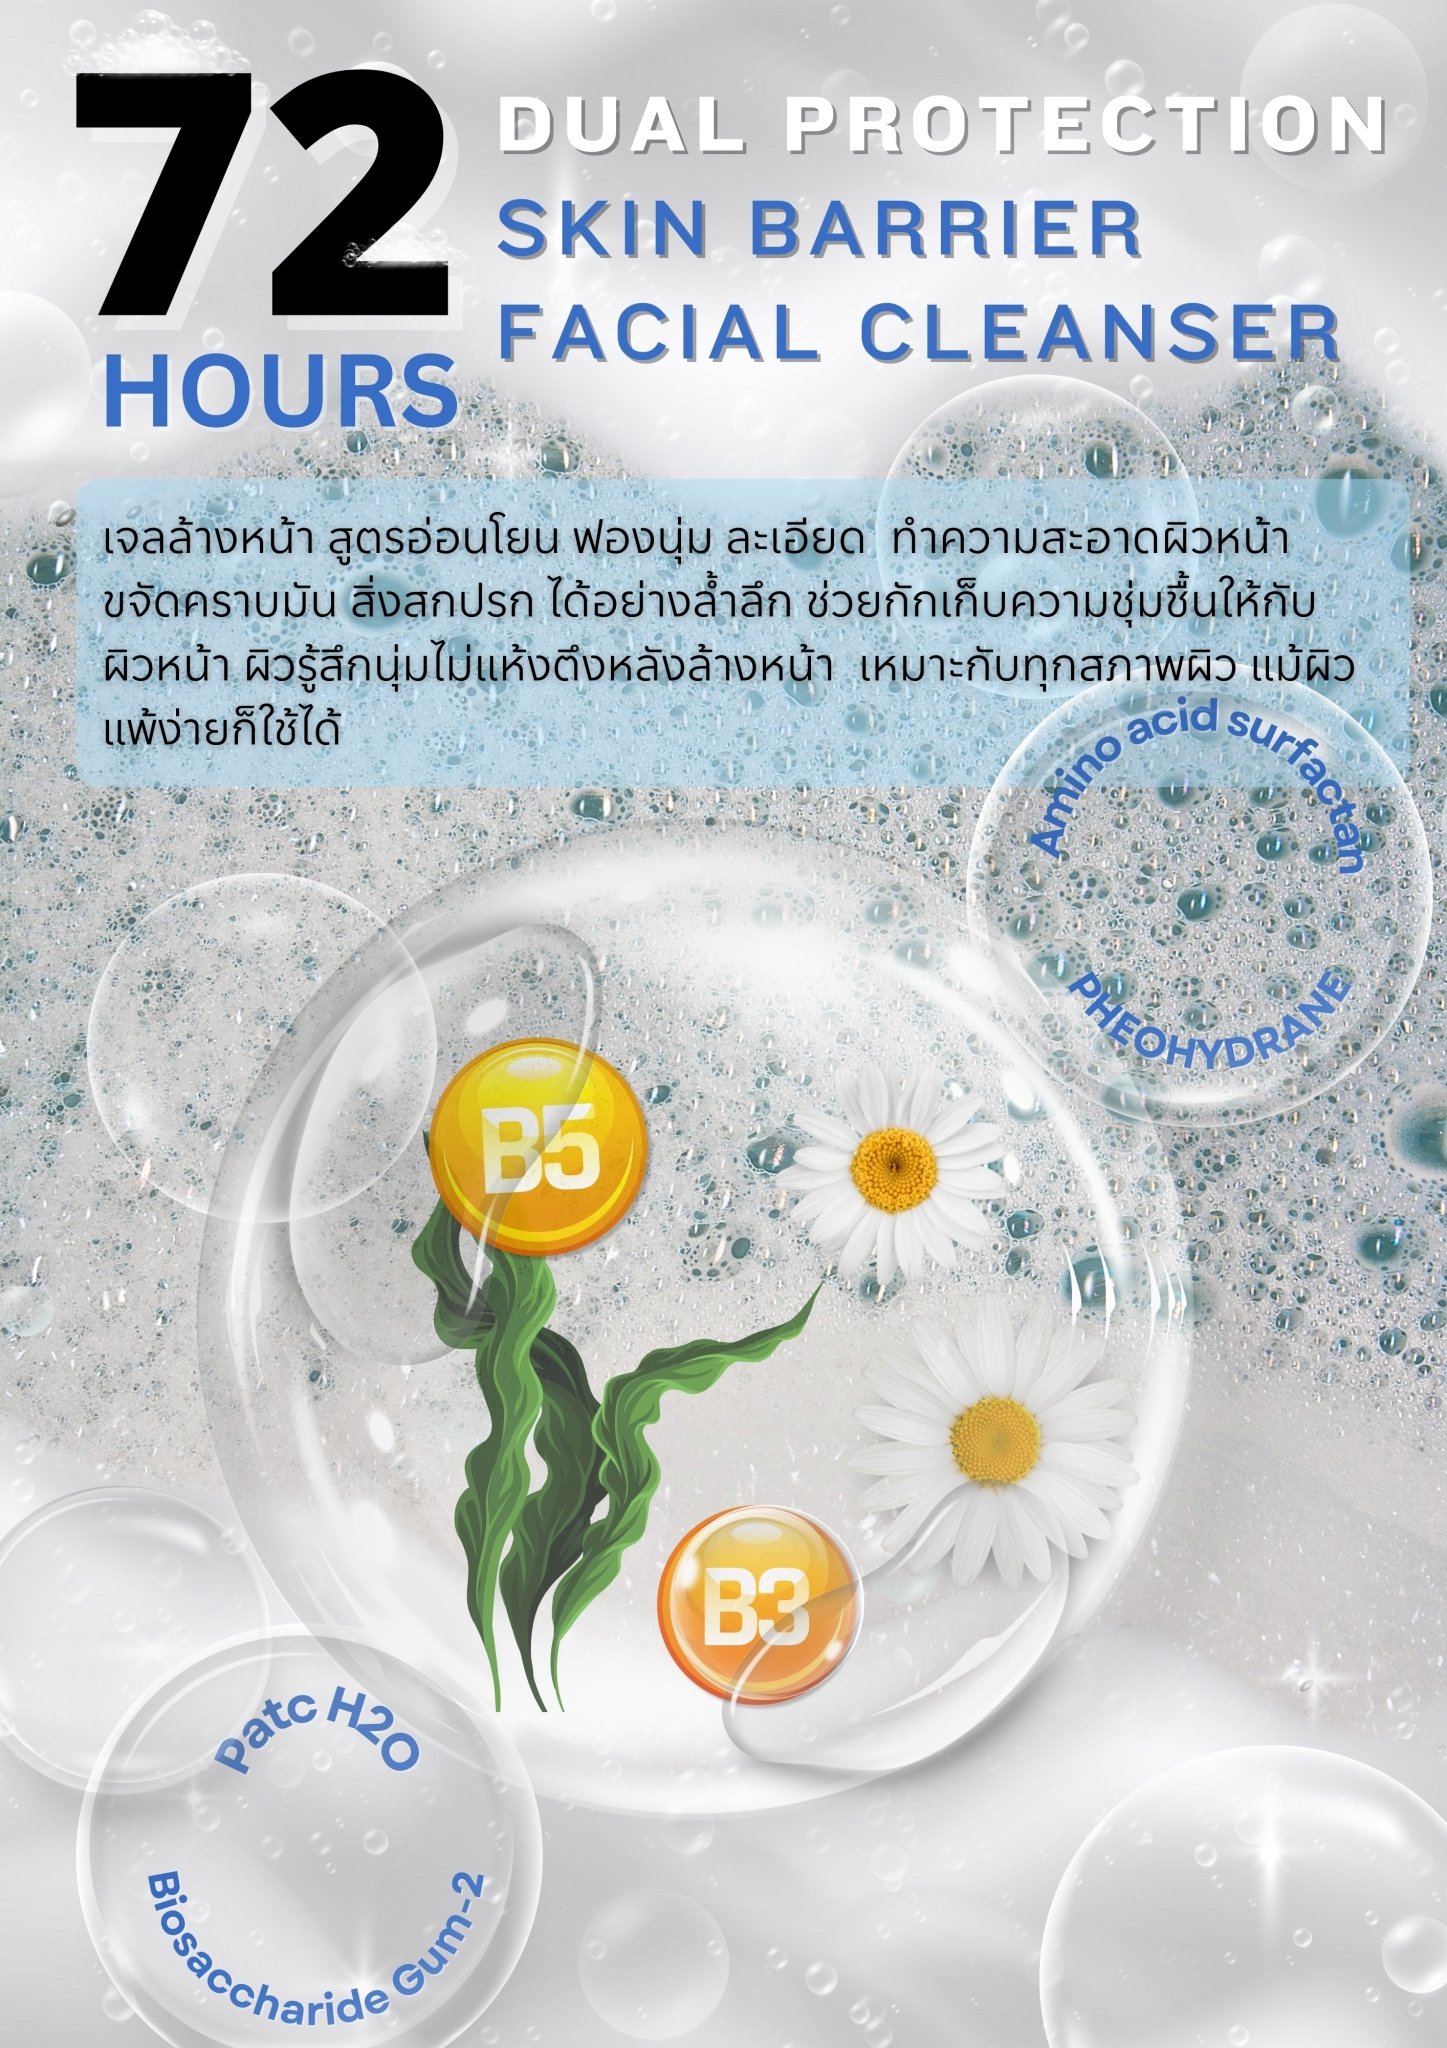 Dual protection skin barrier Facial Cleanser